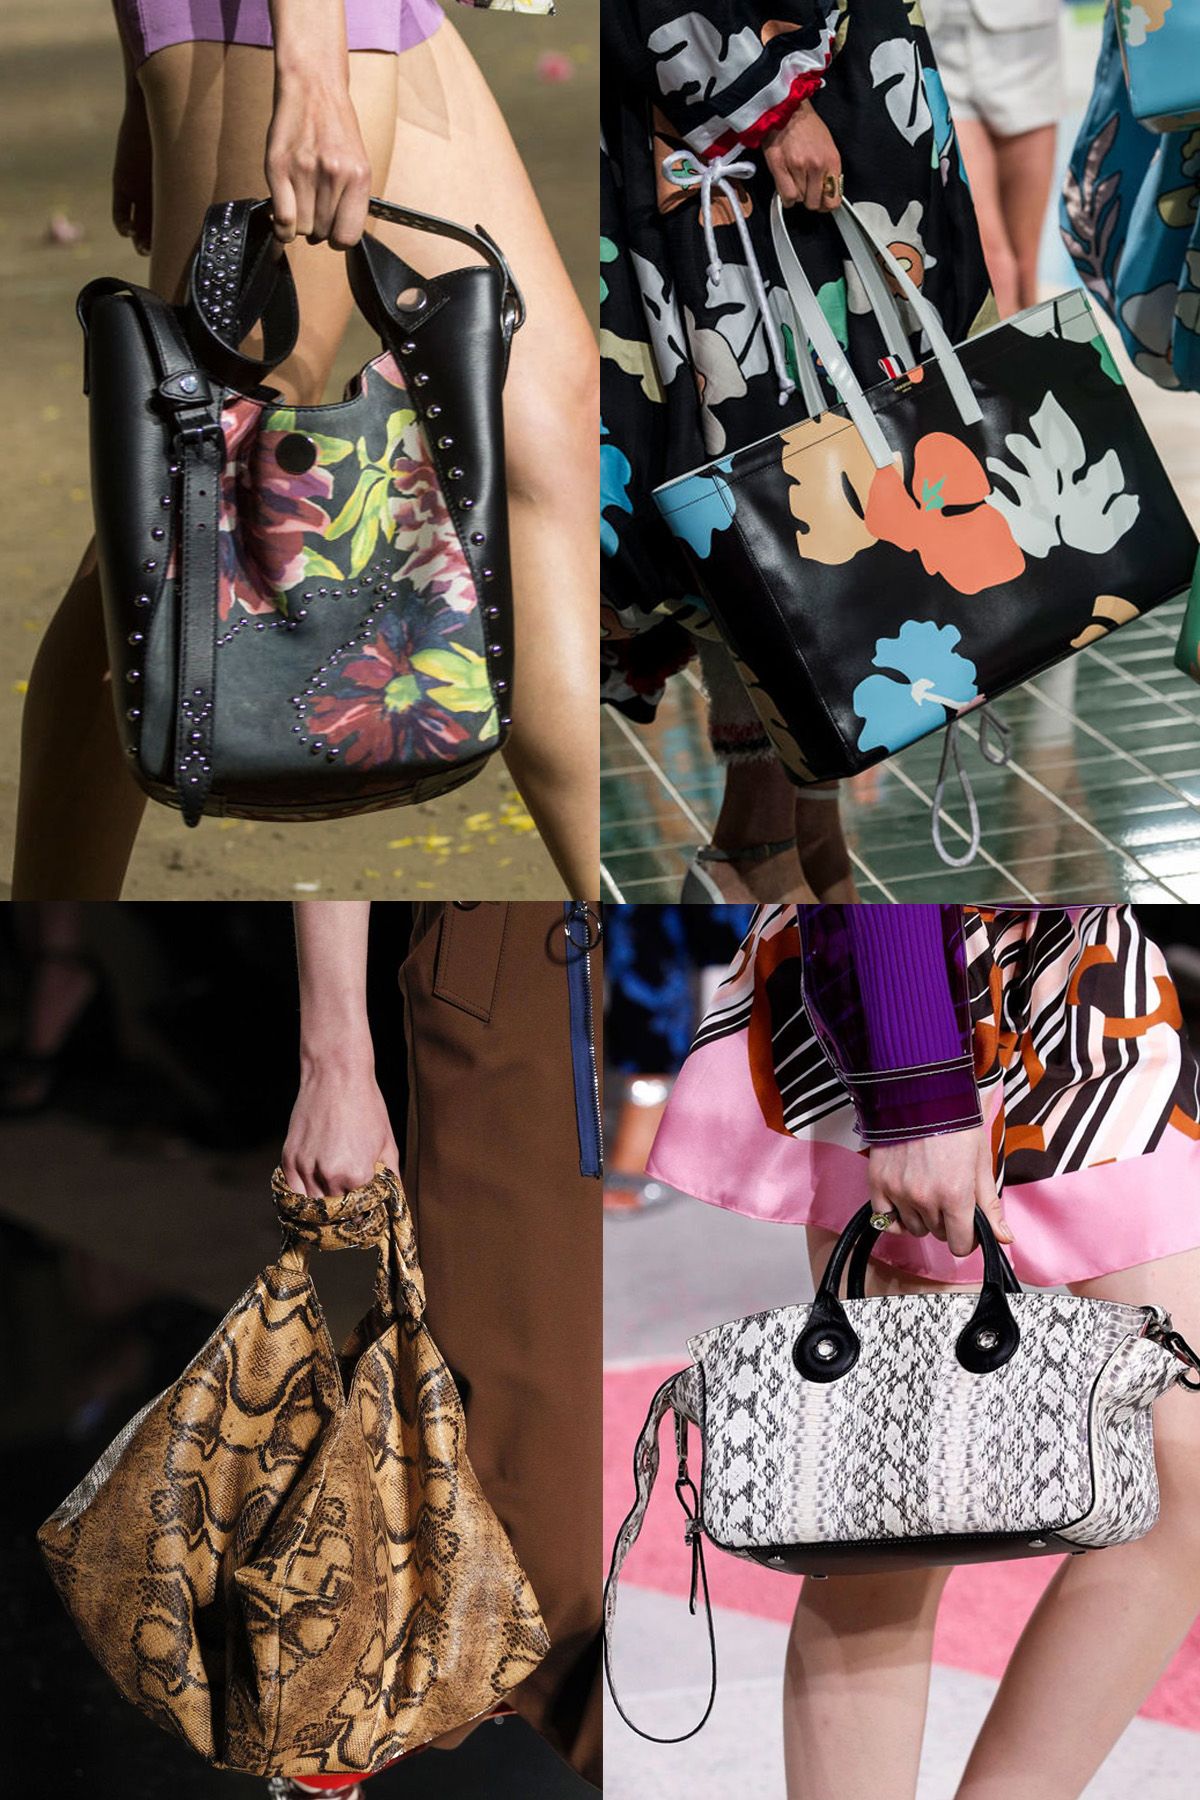 5 Most Stylish Work Bag Inspirations That Are Ready To Be Relyed On For The Office